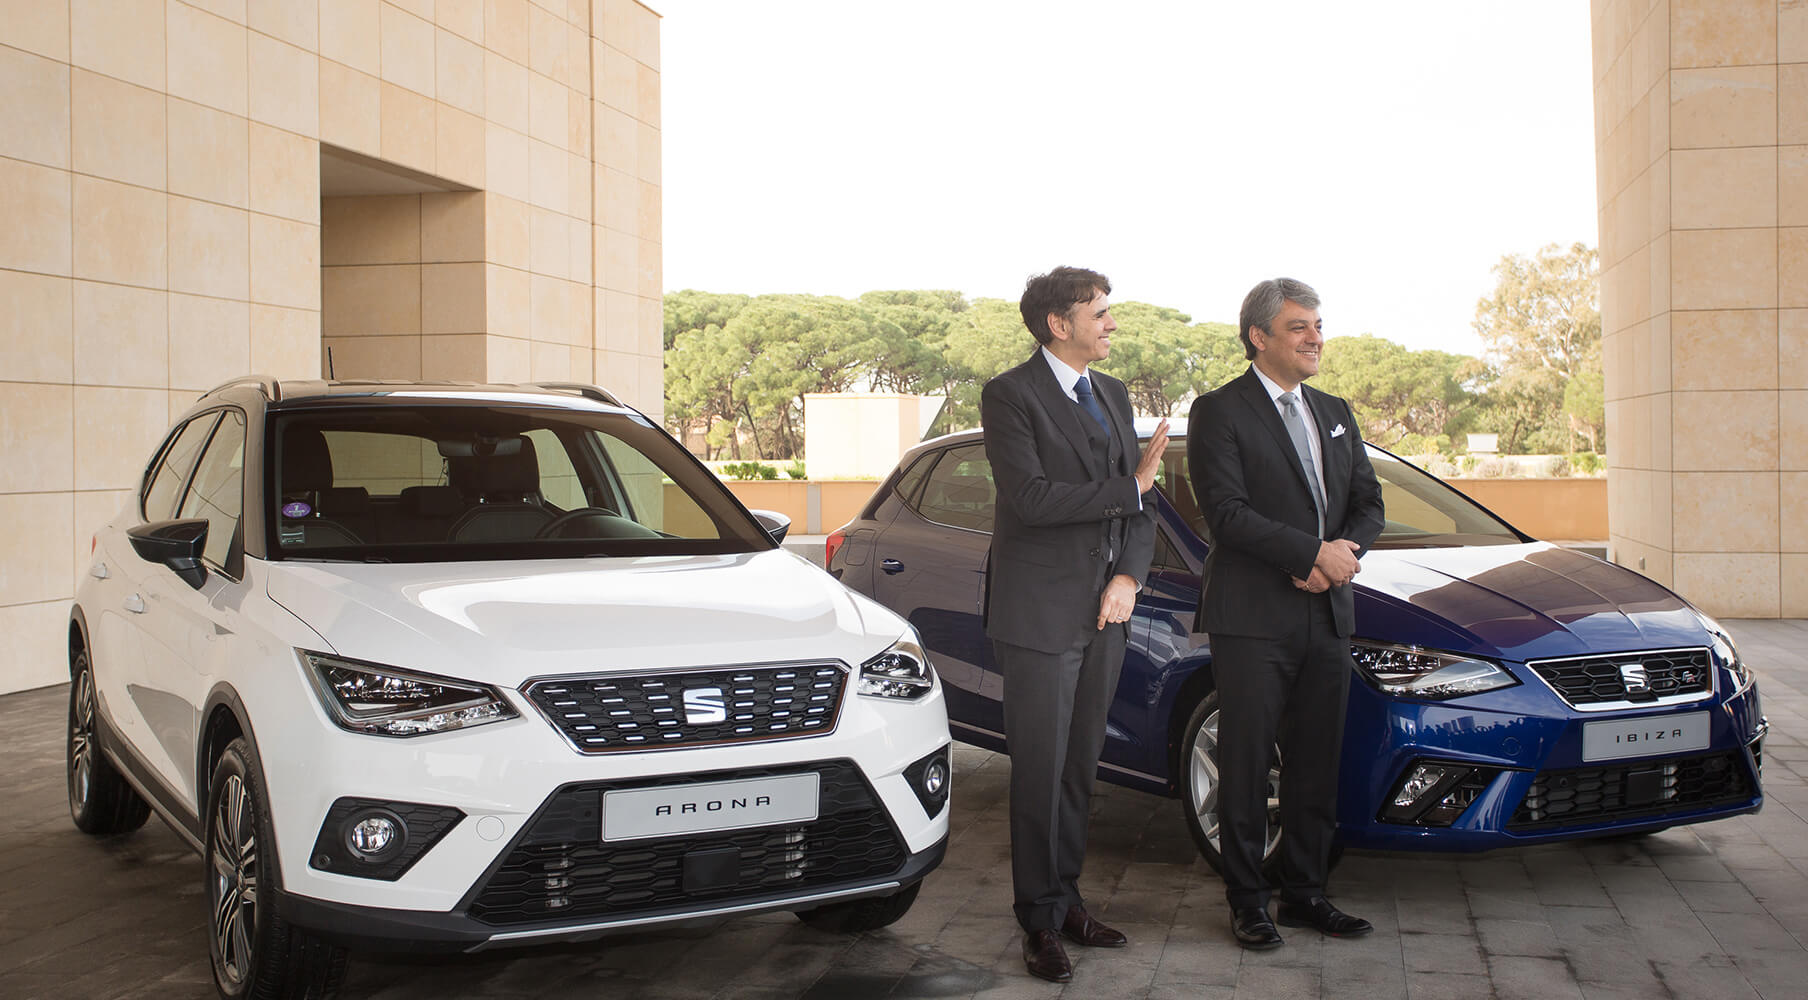 SEAT promote CNG cars in Algeria – President Luca de Meo, Vice-president Klaus Ziegler posing with two SEAT models